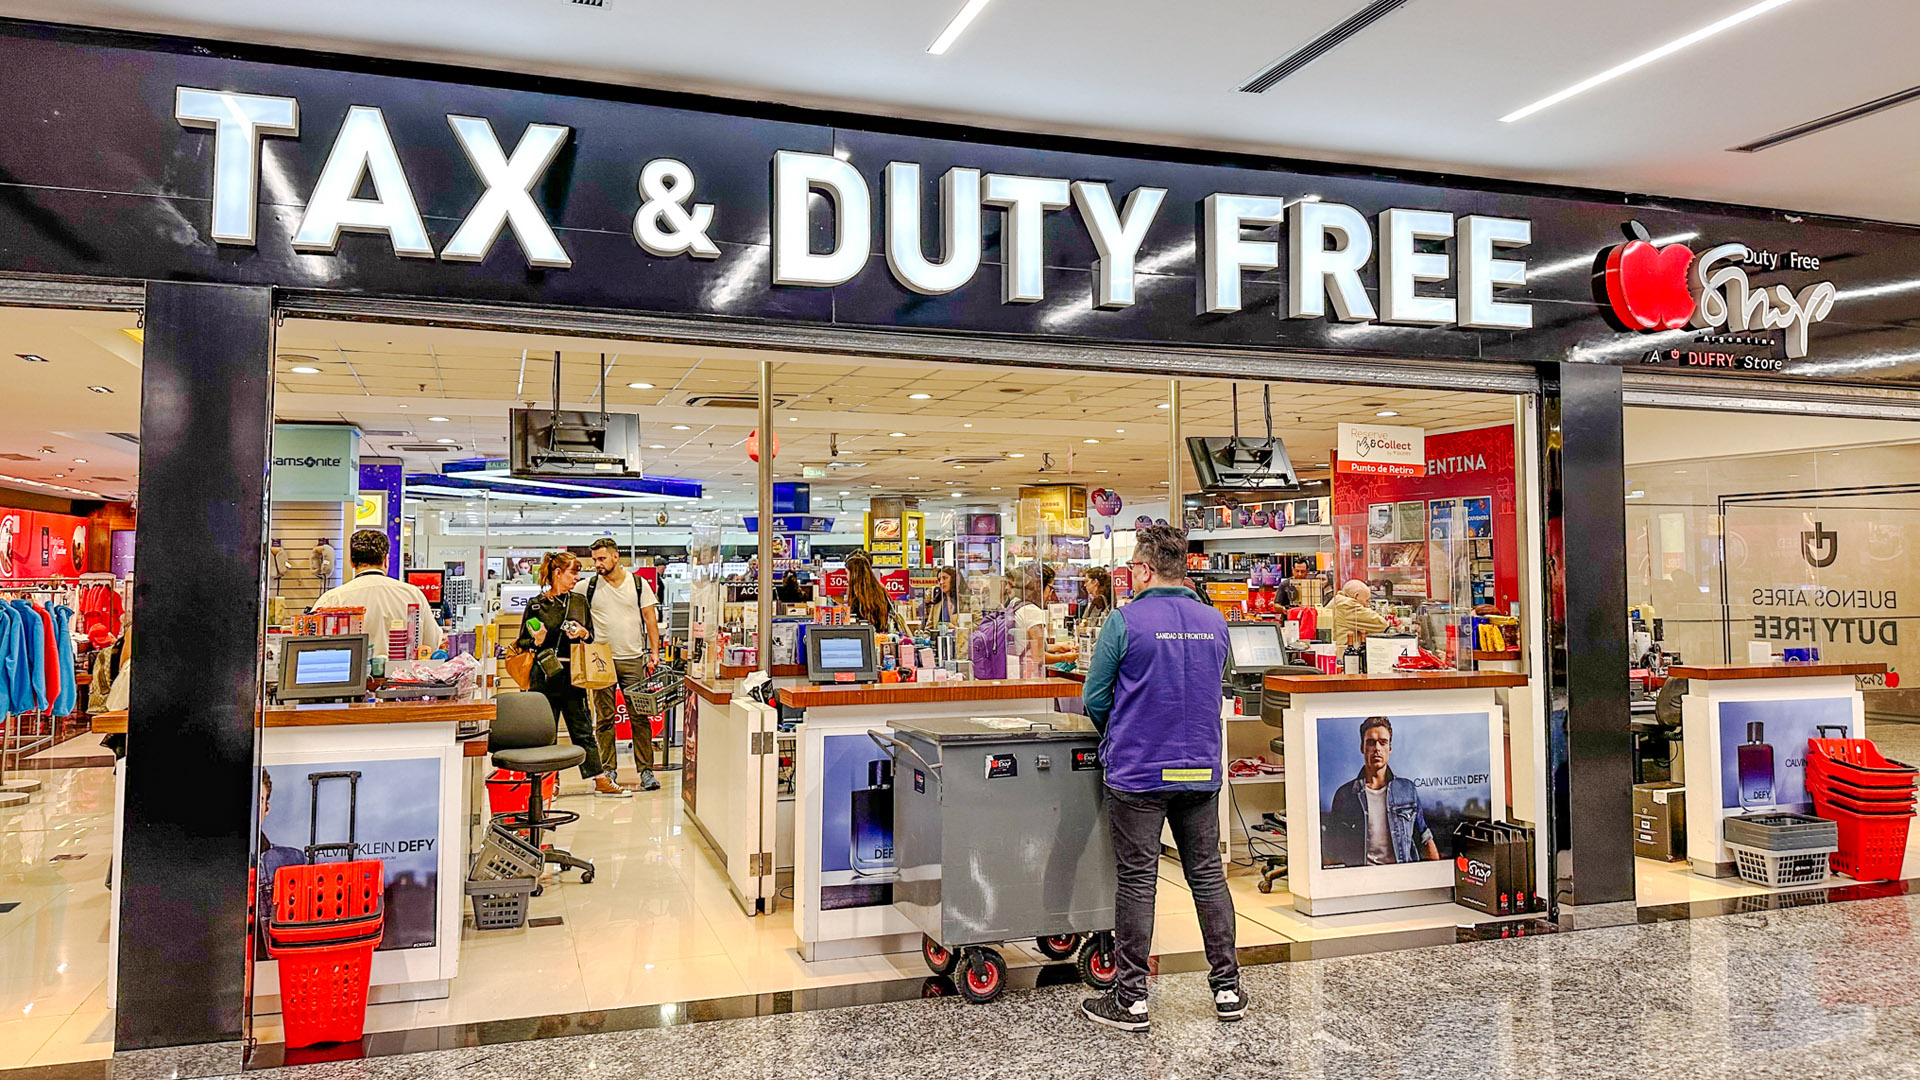 Duty free shop Buenos Aires